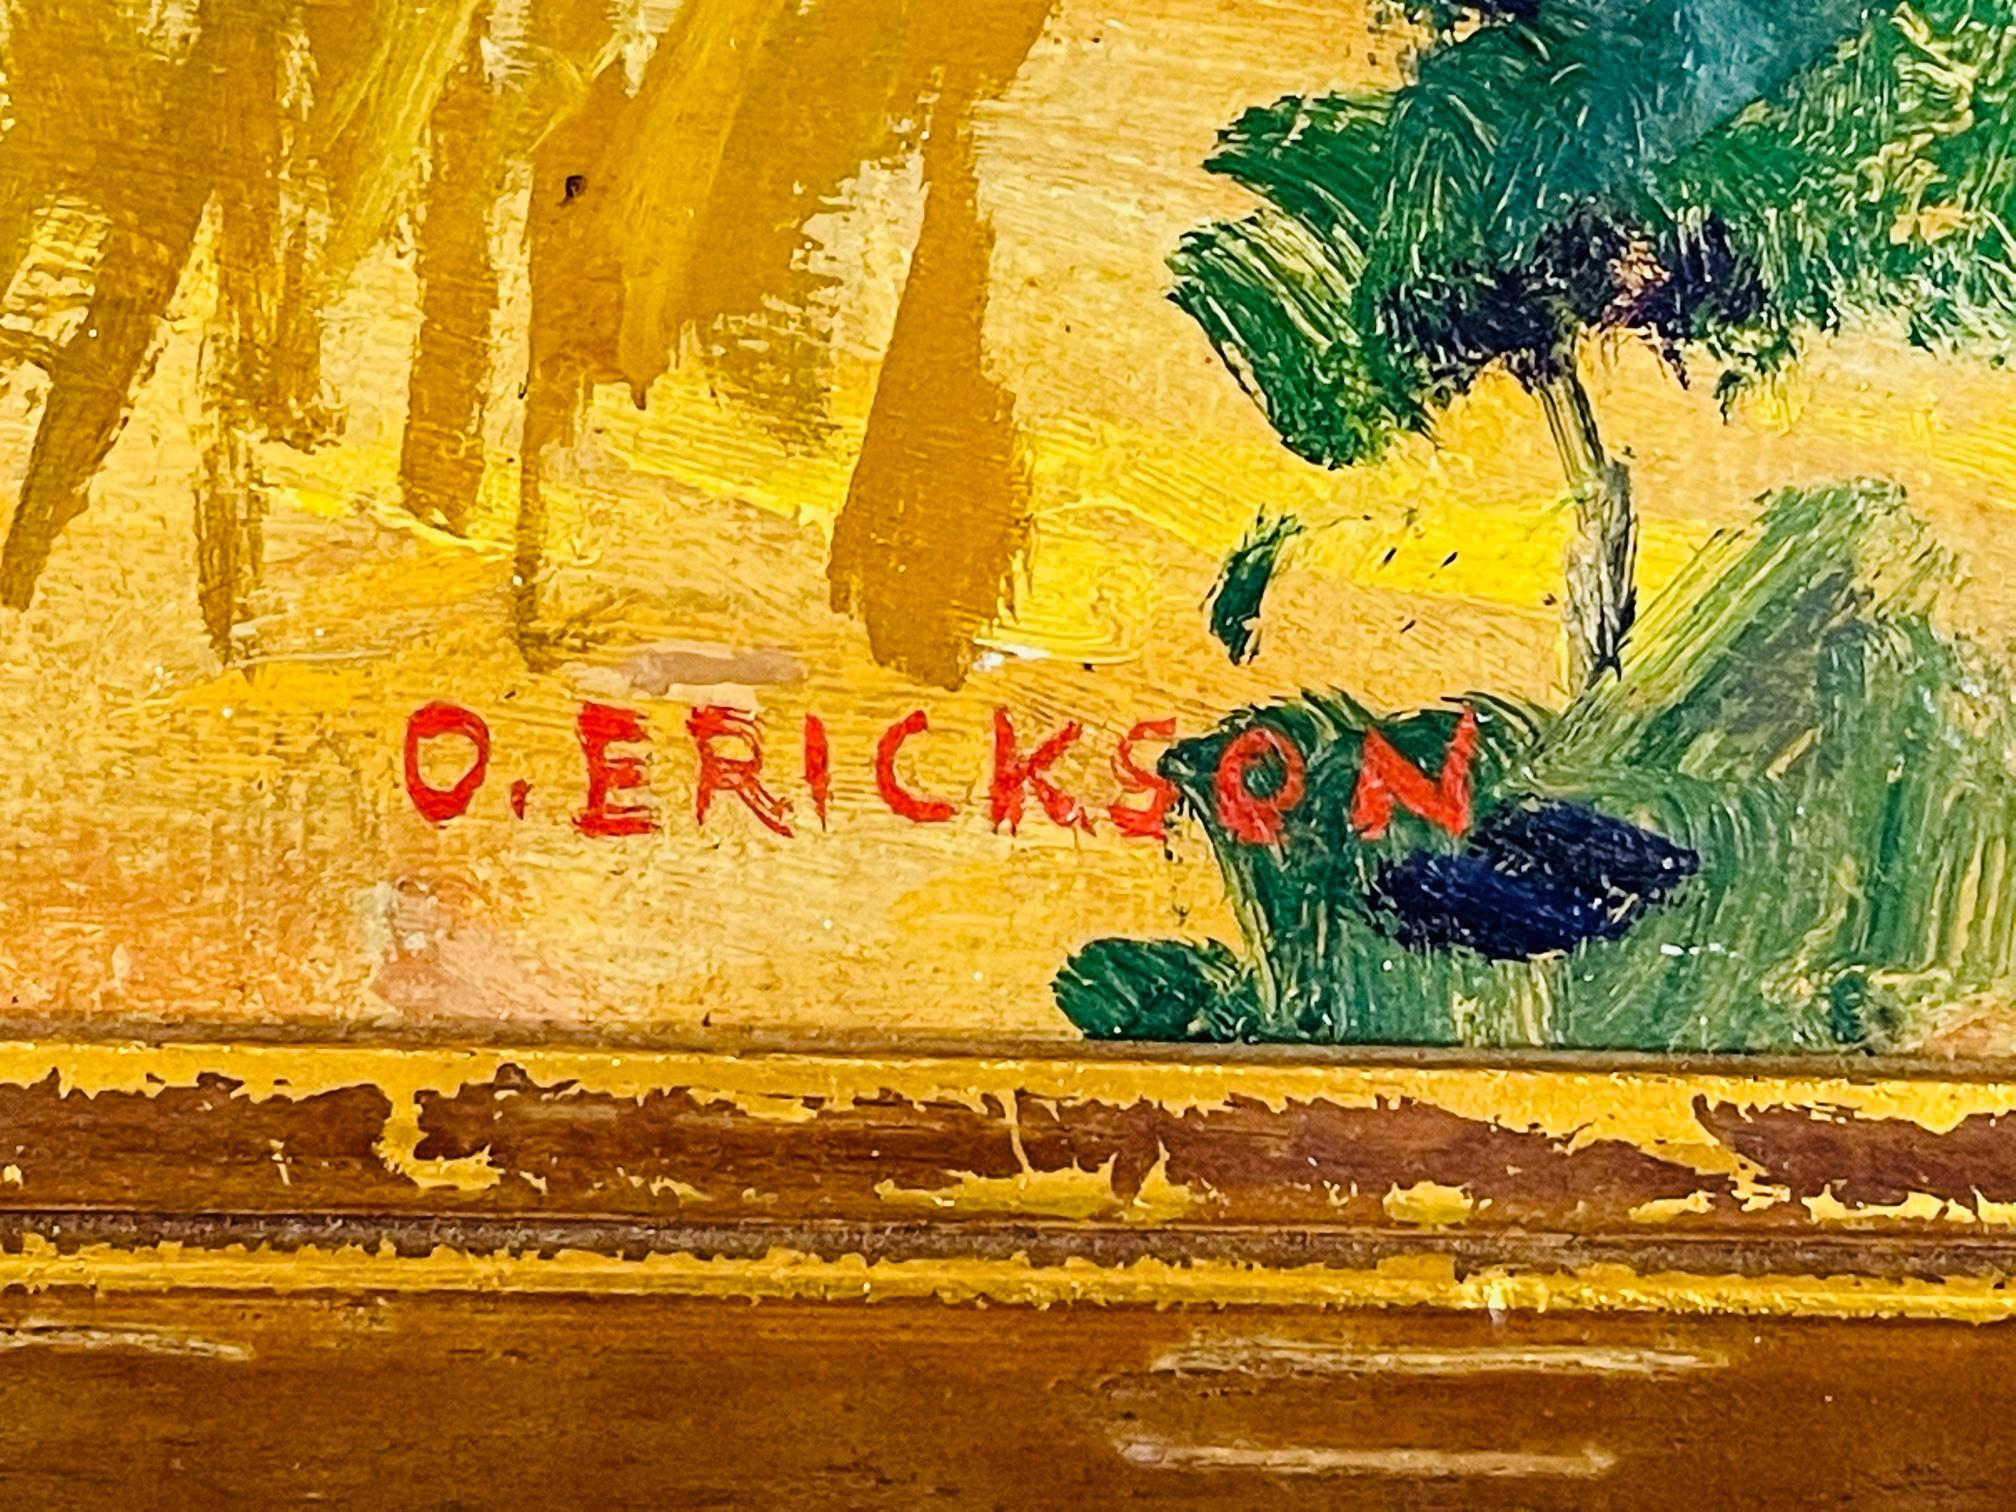 Landscape Oil on Board Painting Signed O.Erickson 2